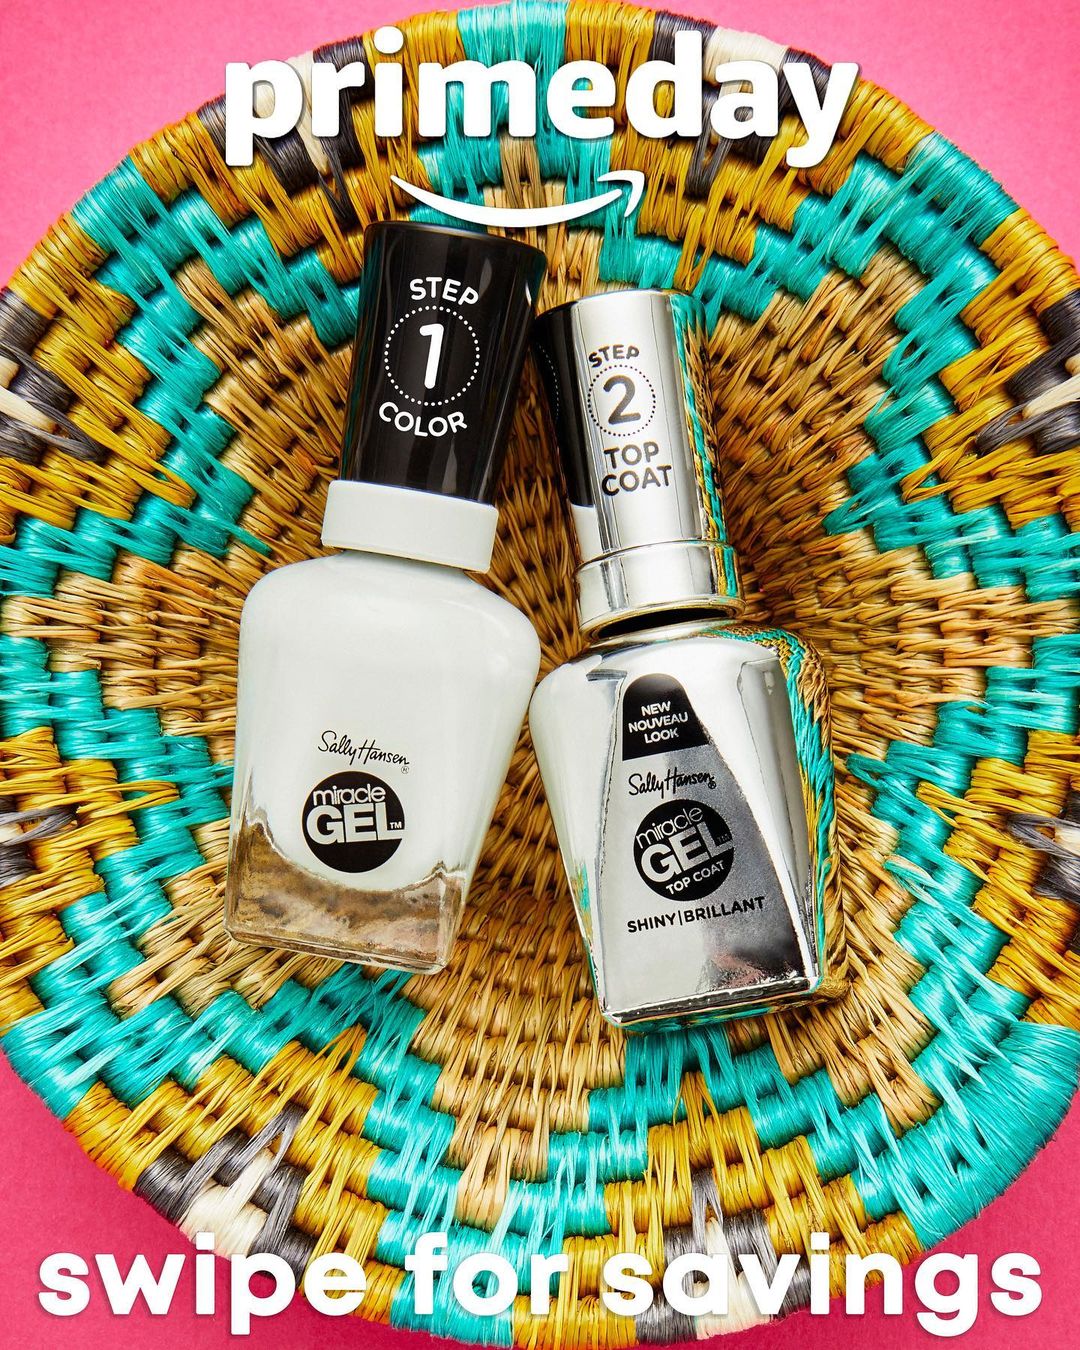 Sally Hansen - Last day to save 🚨🚨 Shop our #PrimeDay Deals before it’s too late! Swipe for stunning steals on your favorite products, like Miracle Gel nail color and Top Coats, Good.Kind.Pure., selec...